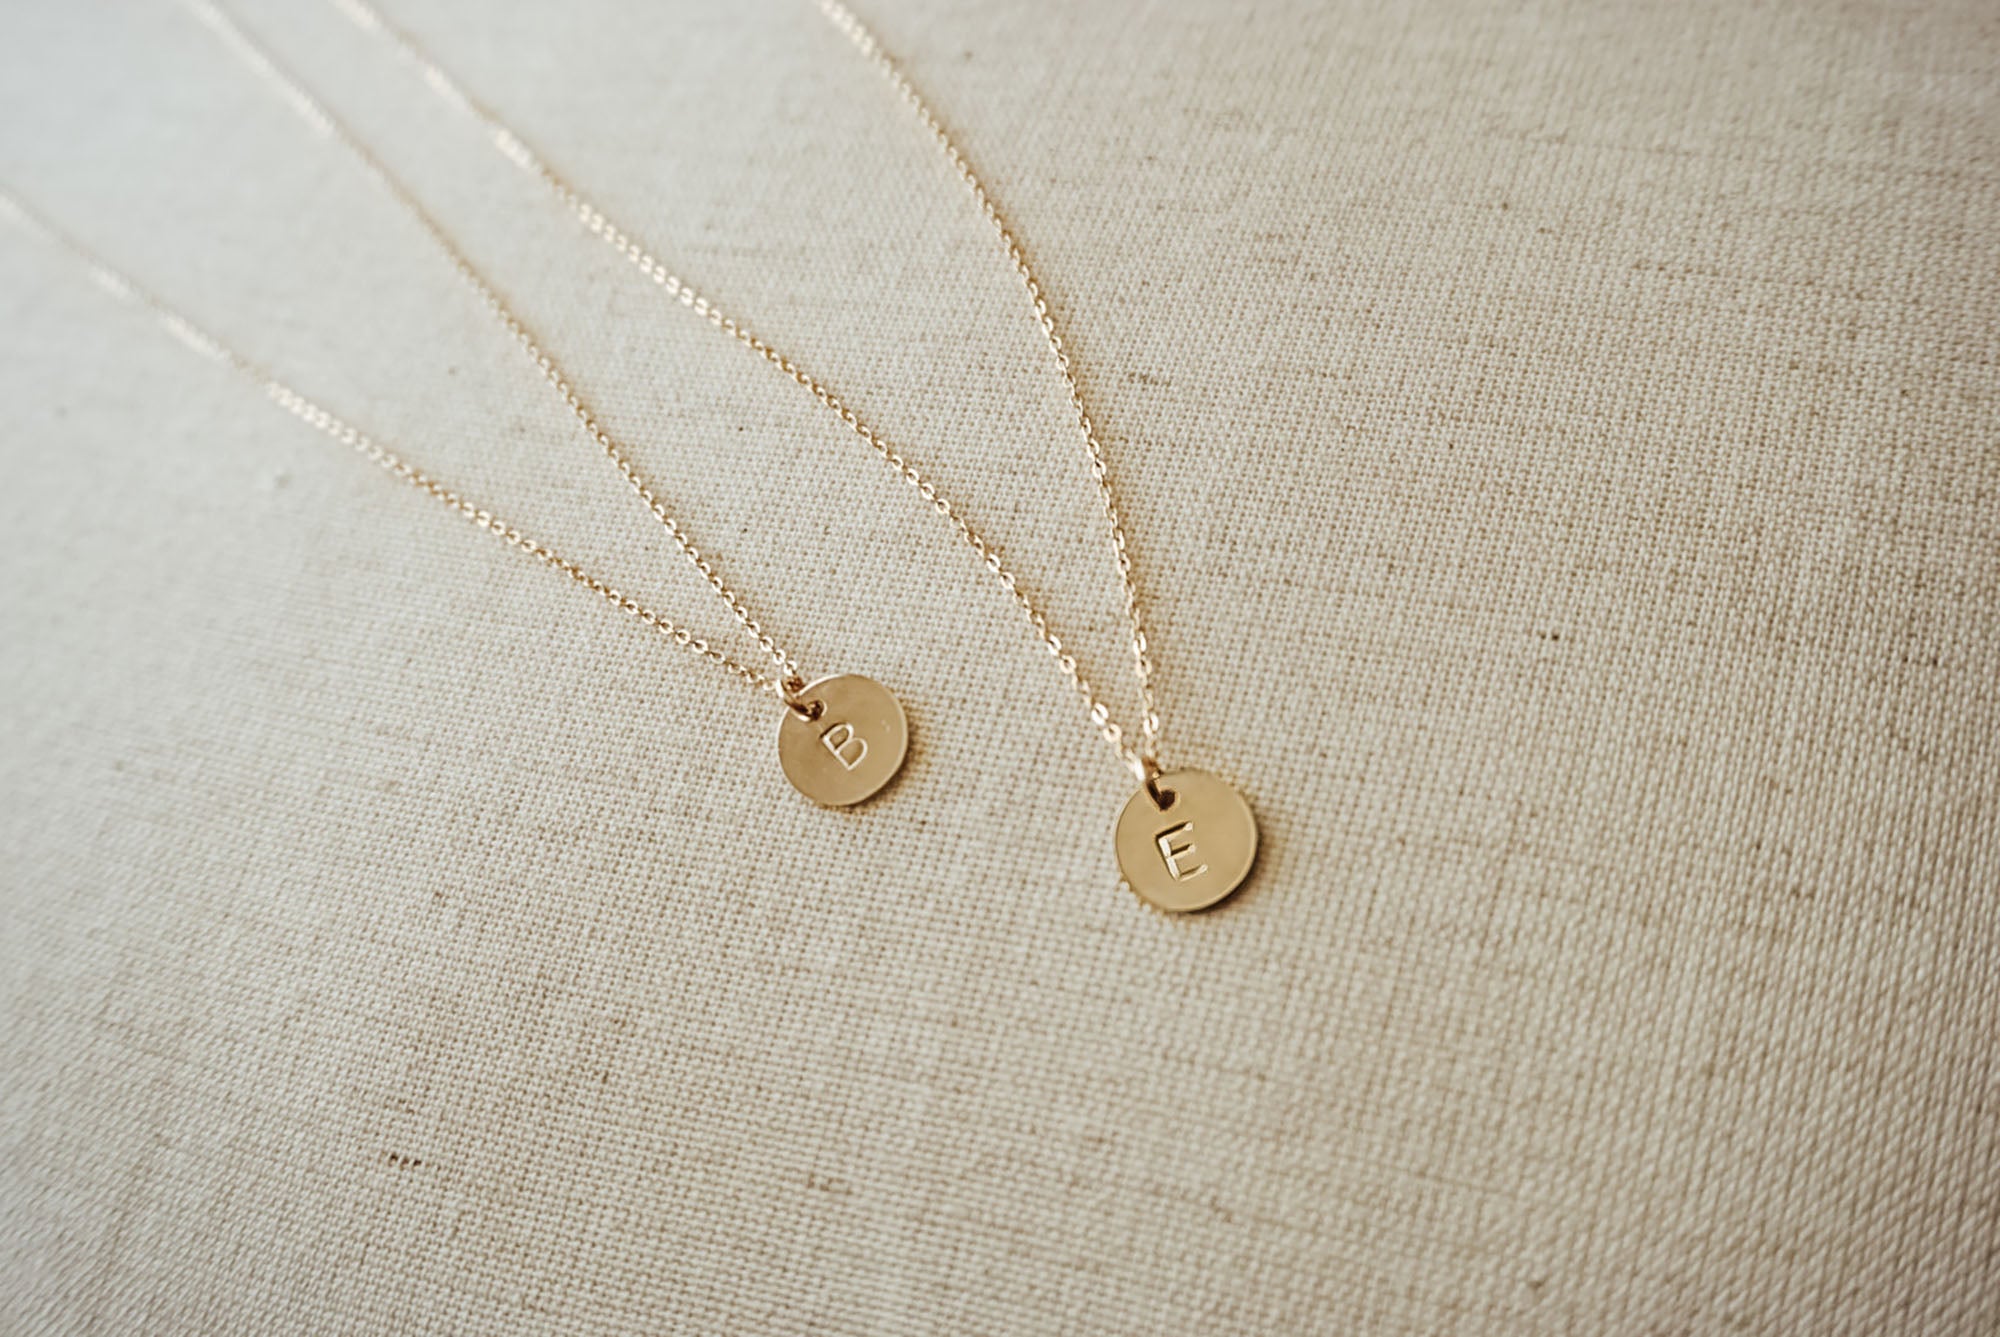 Graduated Disc Necklace 14K Yellow Gold 16